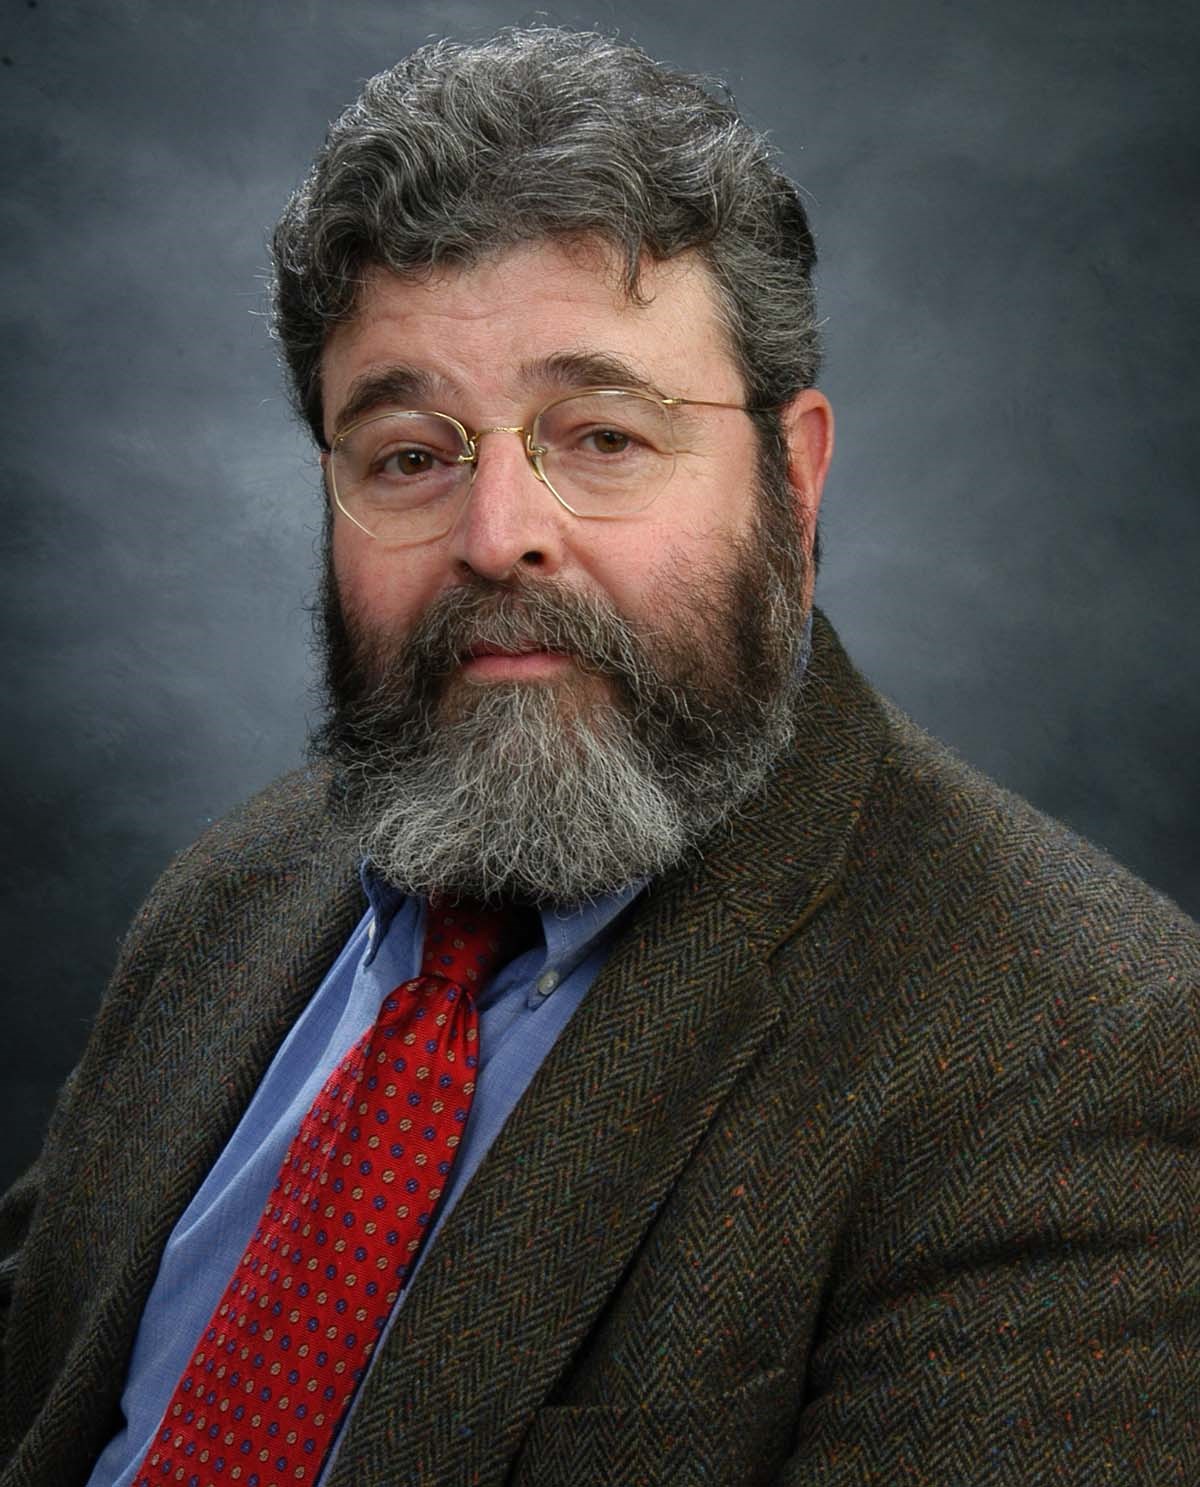 James M. Moran is a Senior Adjunct Professor in the Electrical and Computer Engineering Department at UMass Lowell.